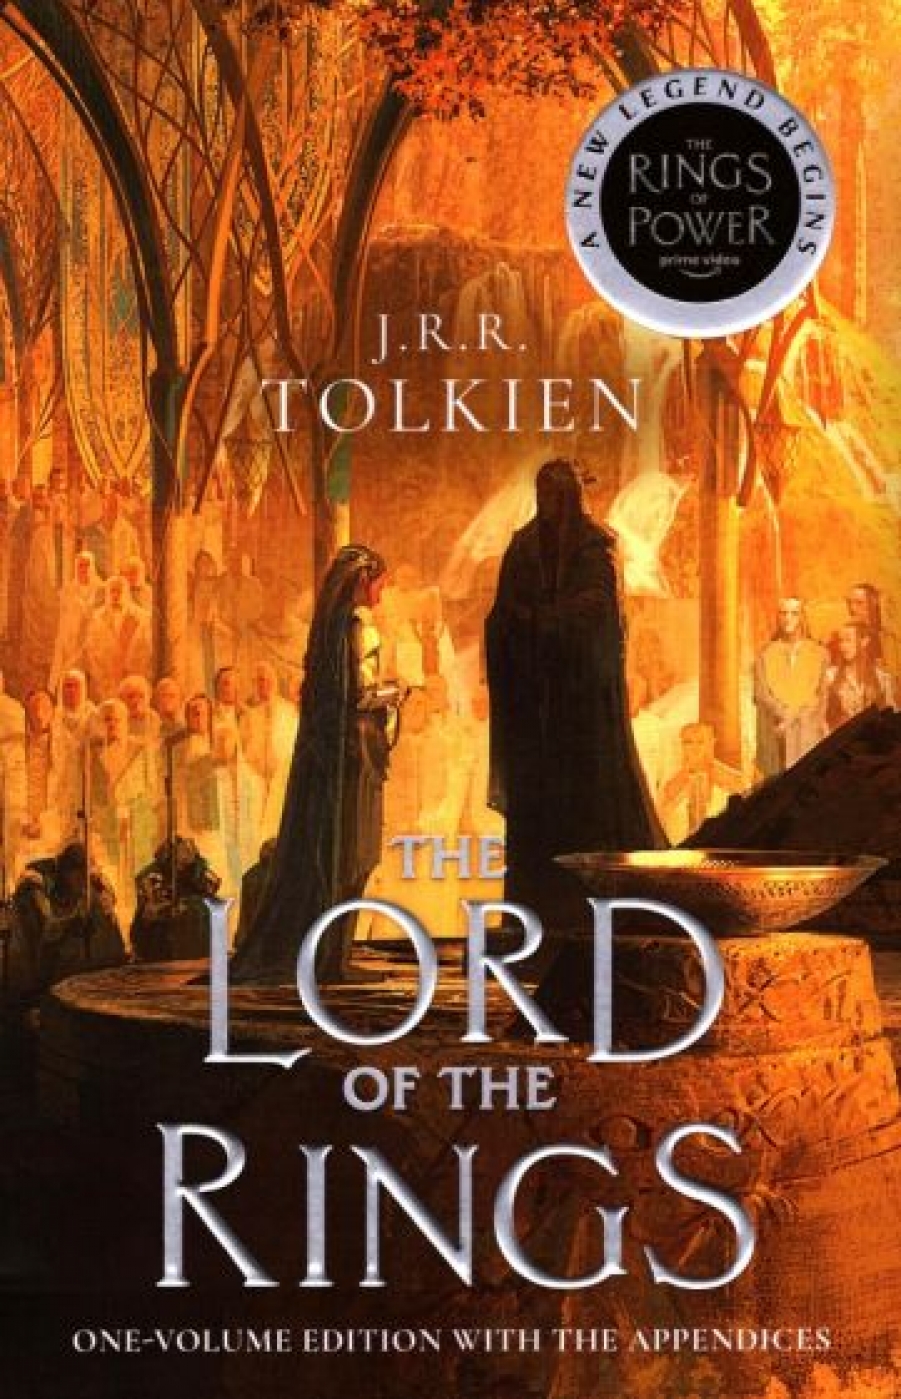 Tolkien John Ronald Reuel The Lord of the Rings 